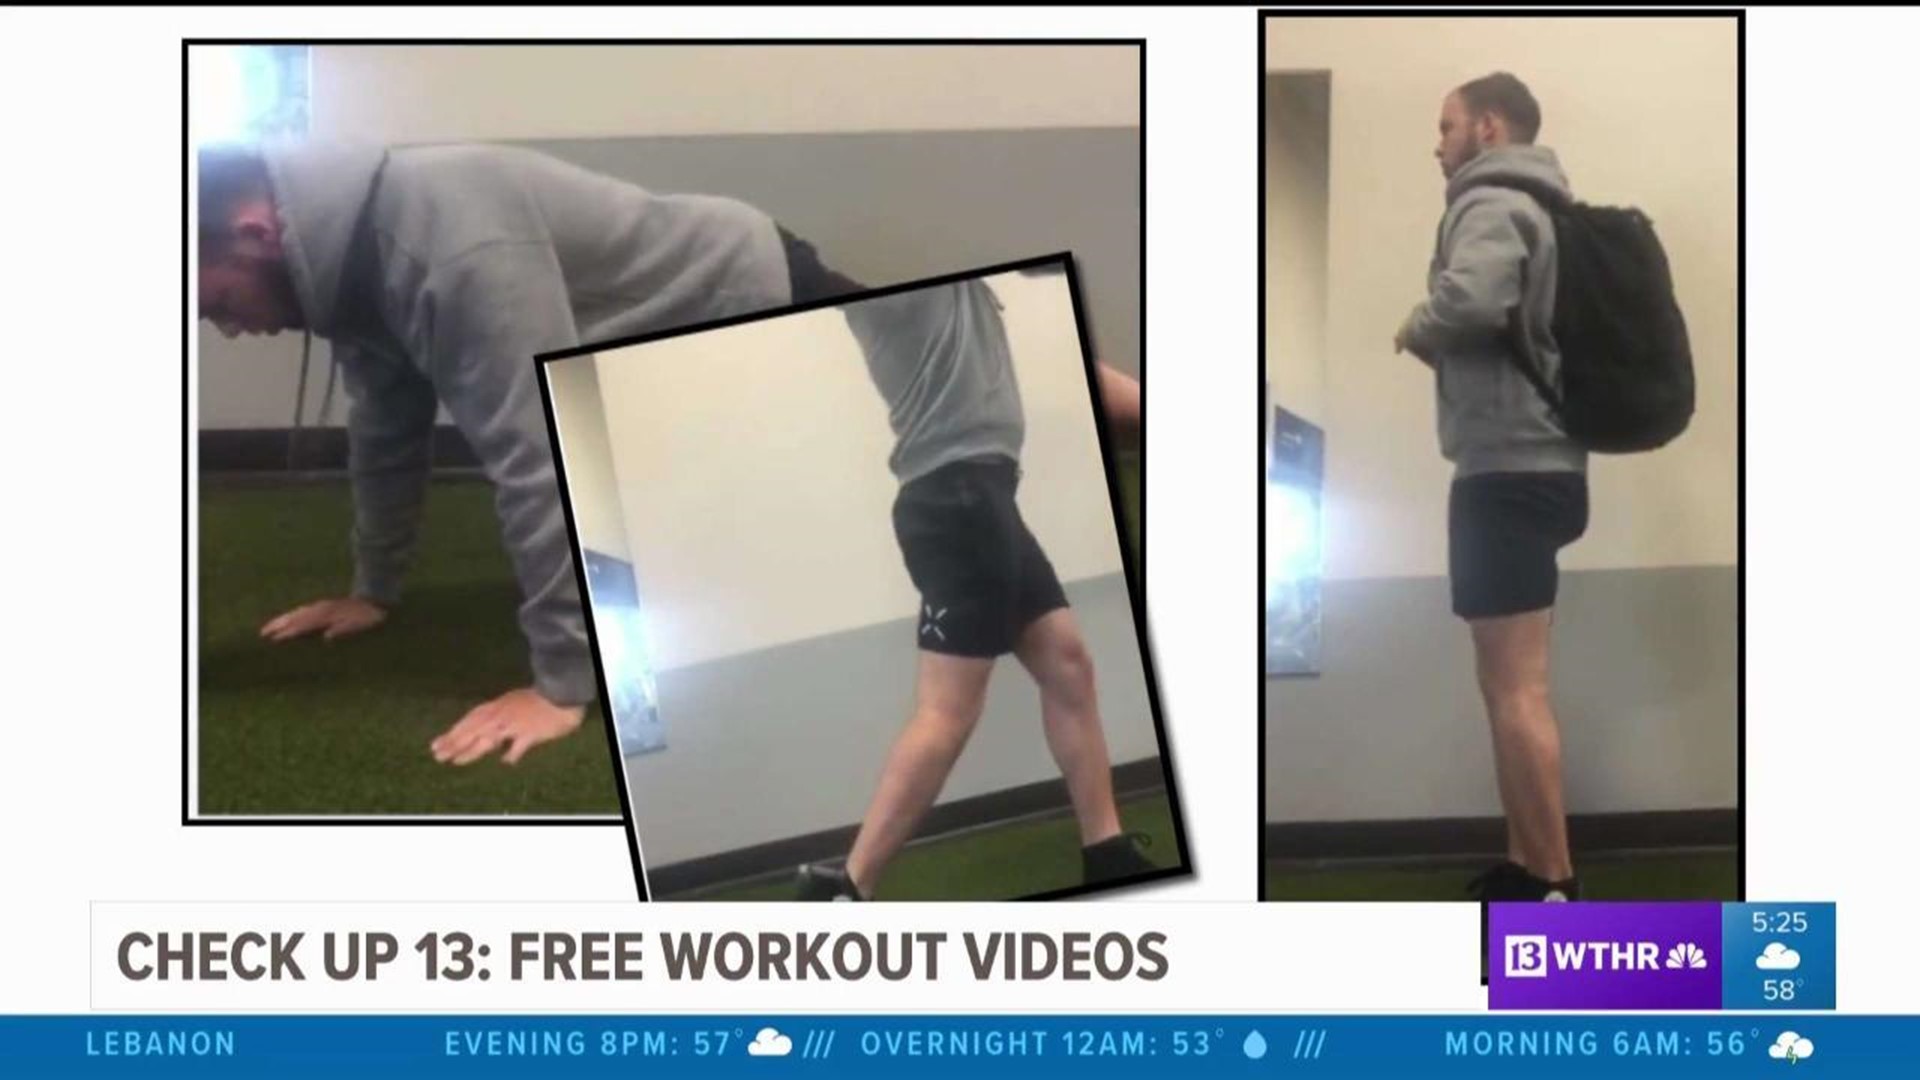 Check Up 13: Free workout videos